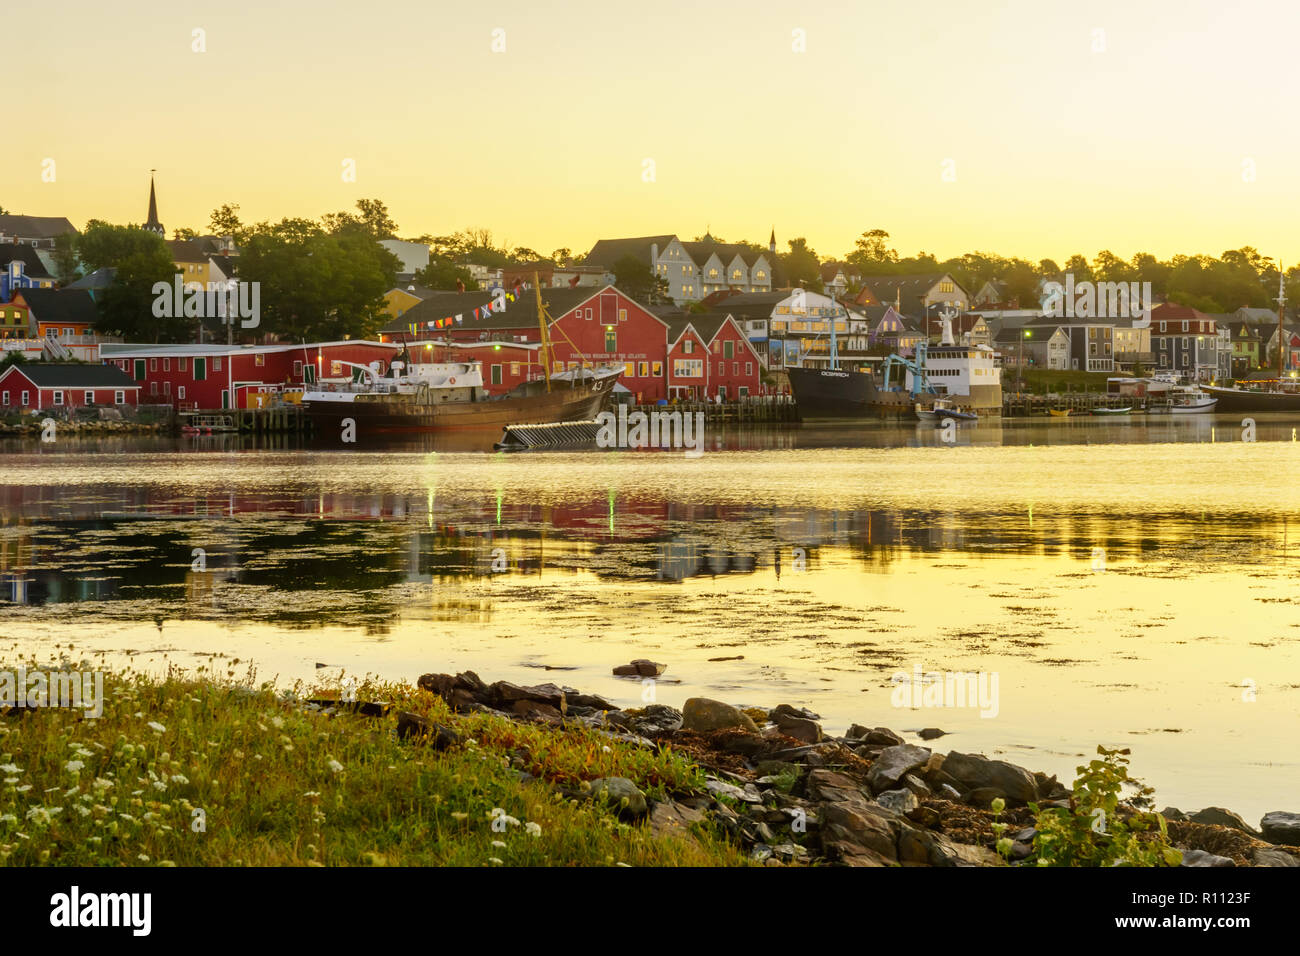 Lunenburg, Canada - September 21, 2018: Sunrise view of the waterfront and port of the historic town Lunenburg, Nova Scotia, Canada Stock Photo